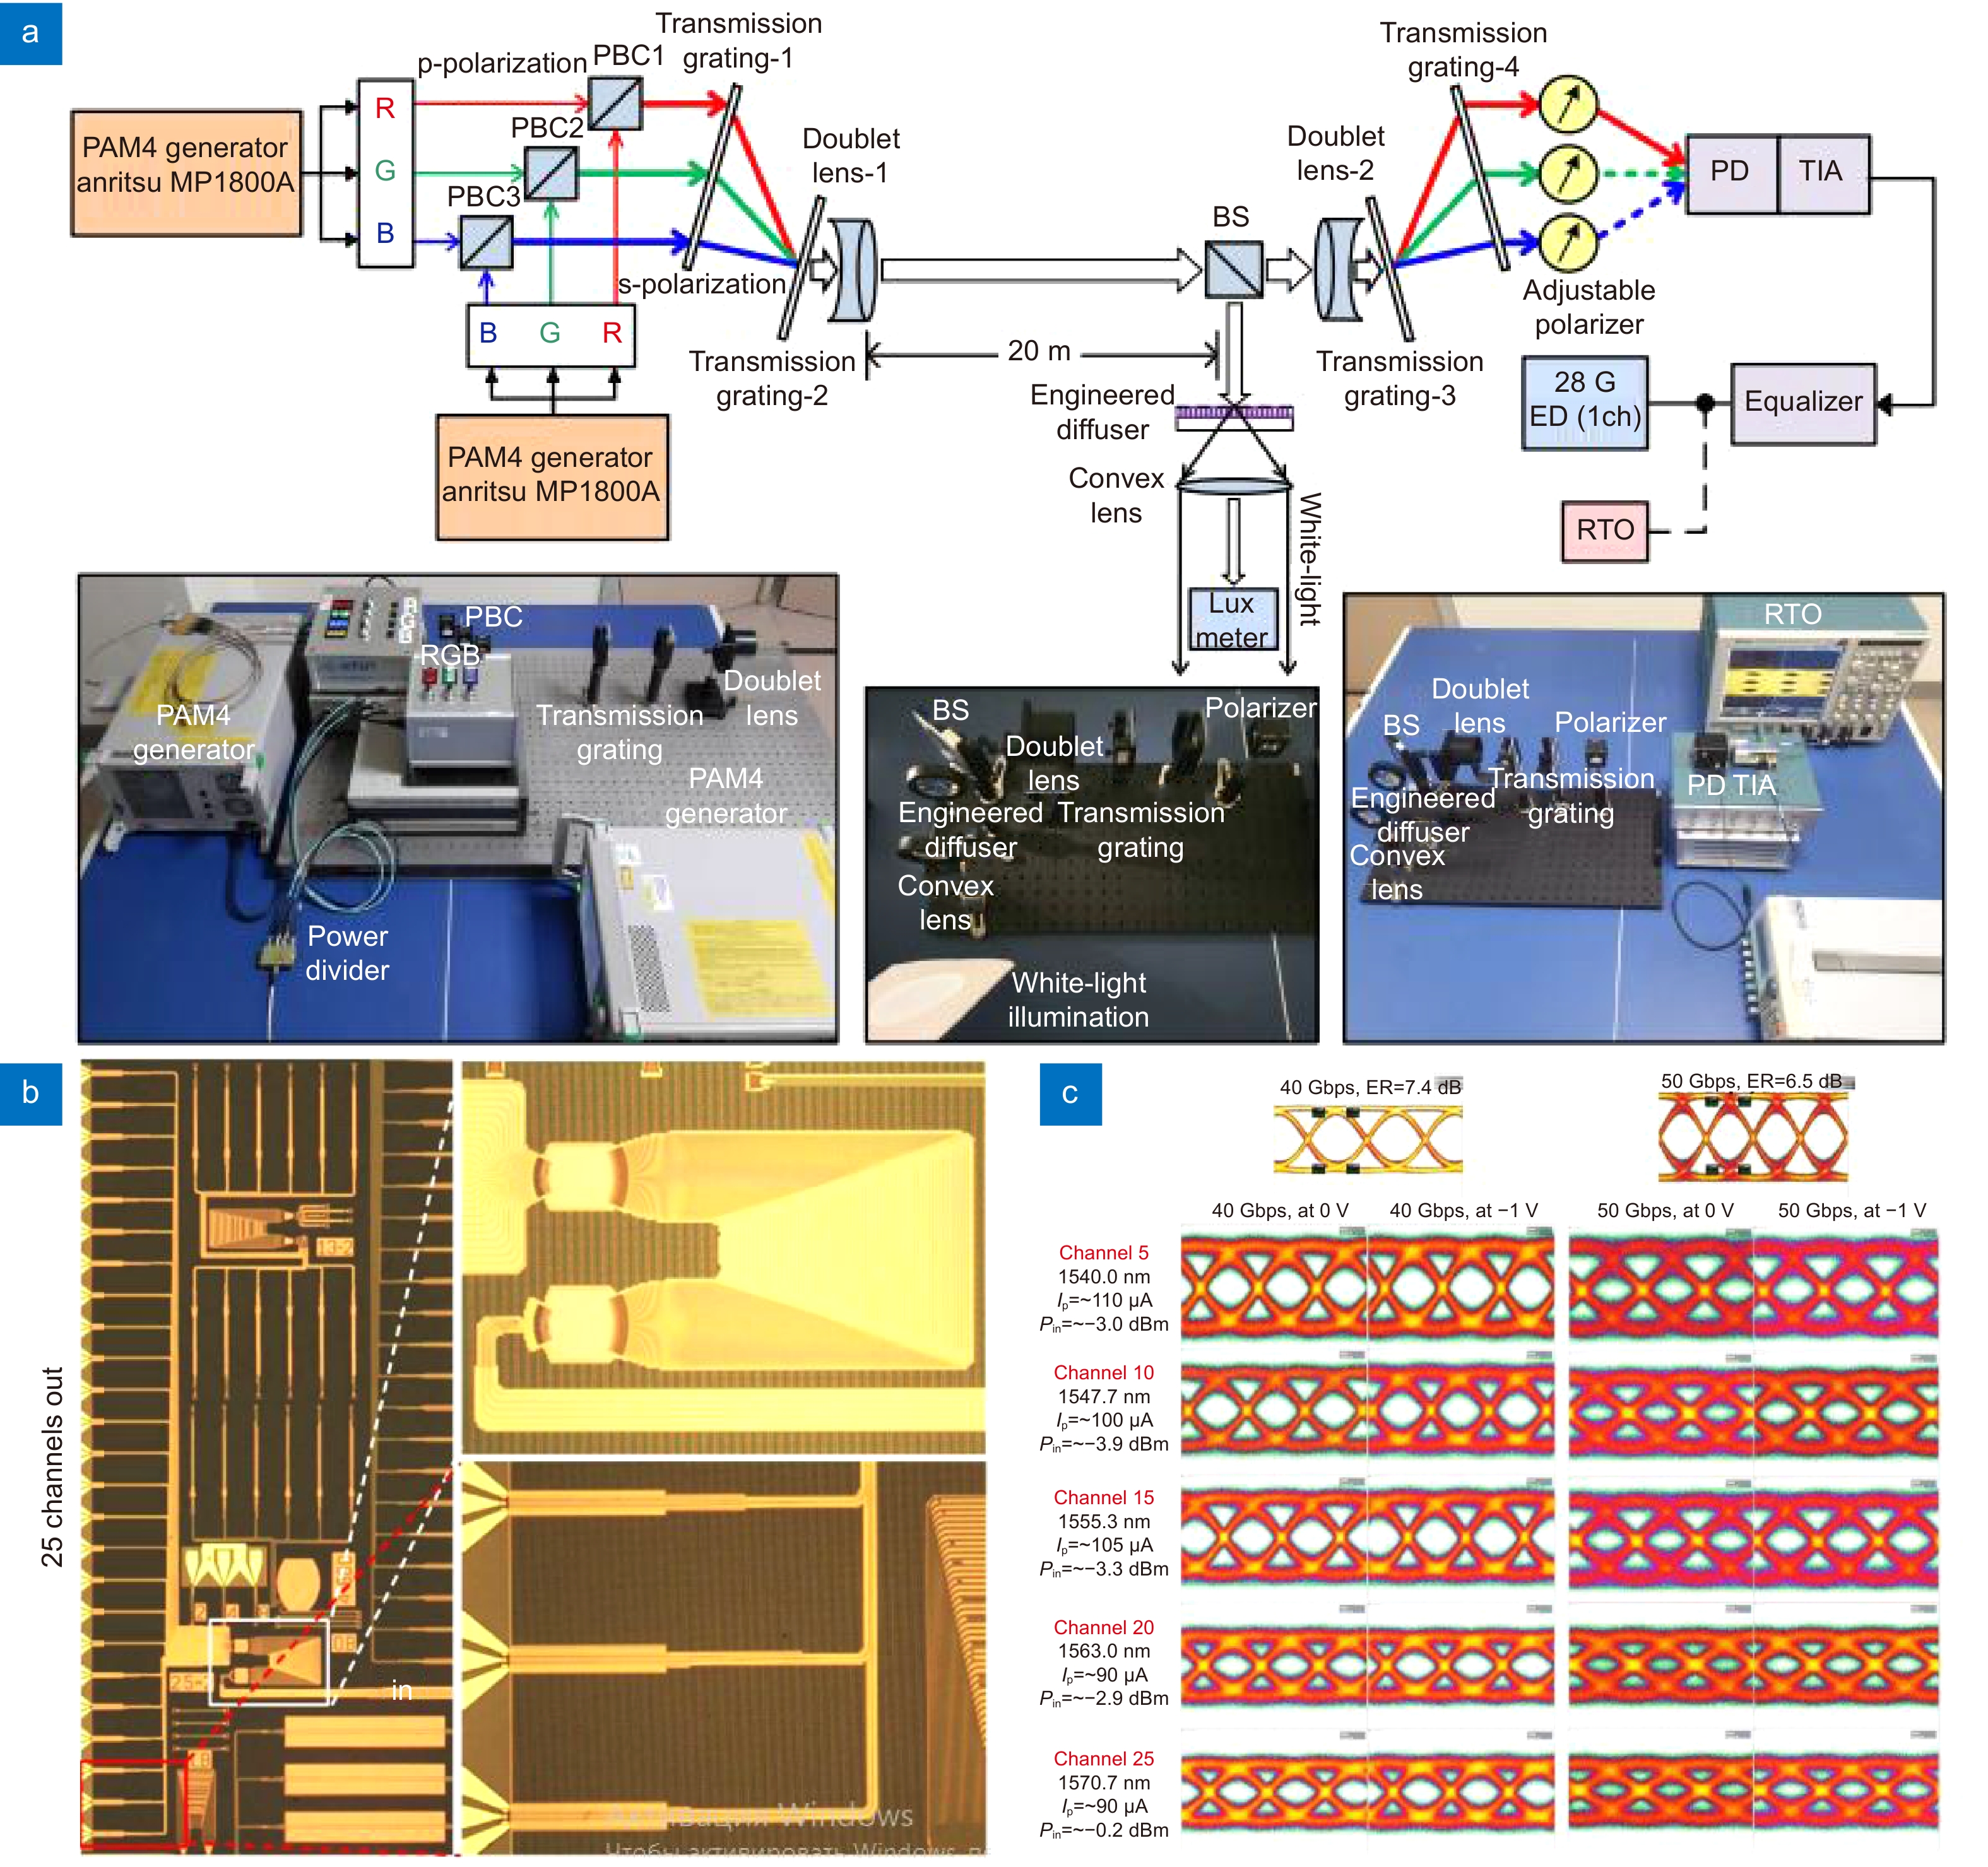 Optical multiplexing techniques and their marriage for on-chip and optical fiber communication: a review_3